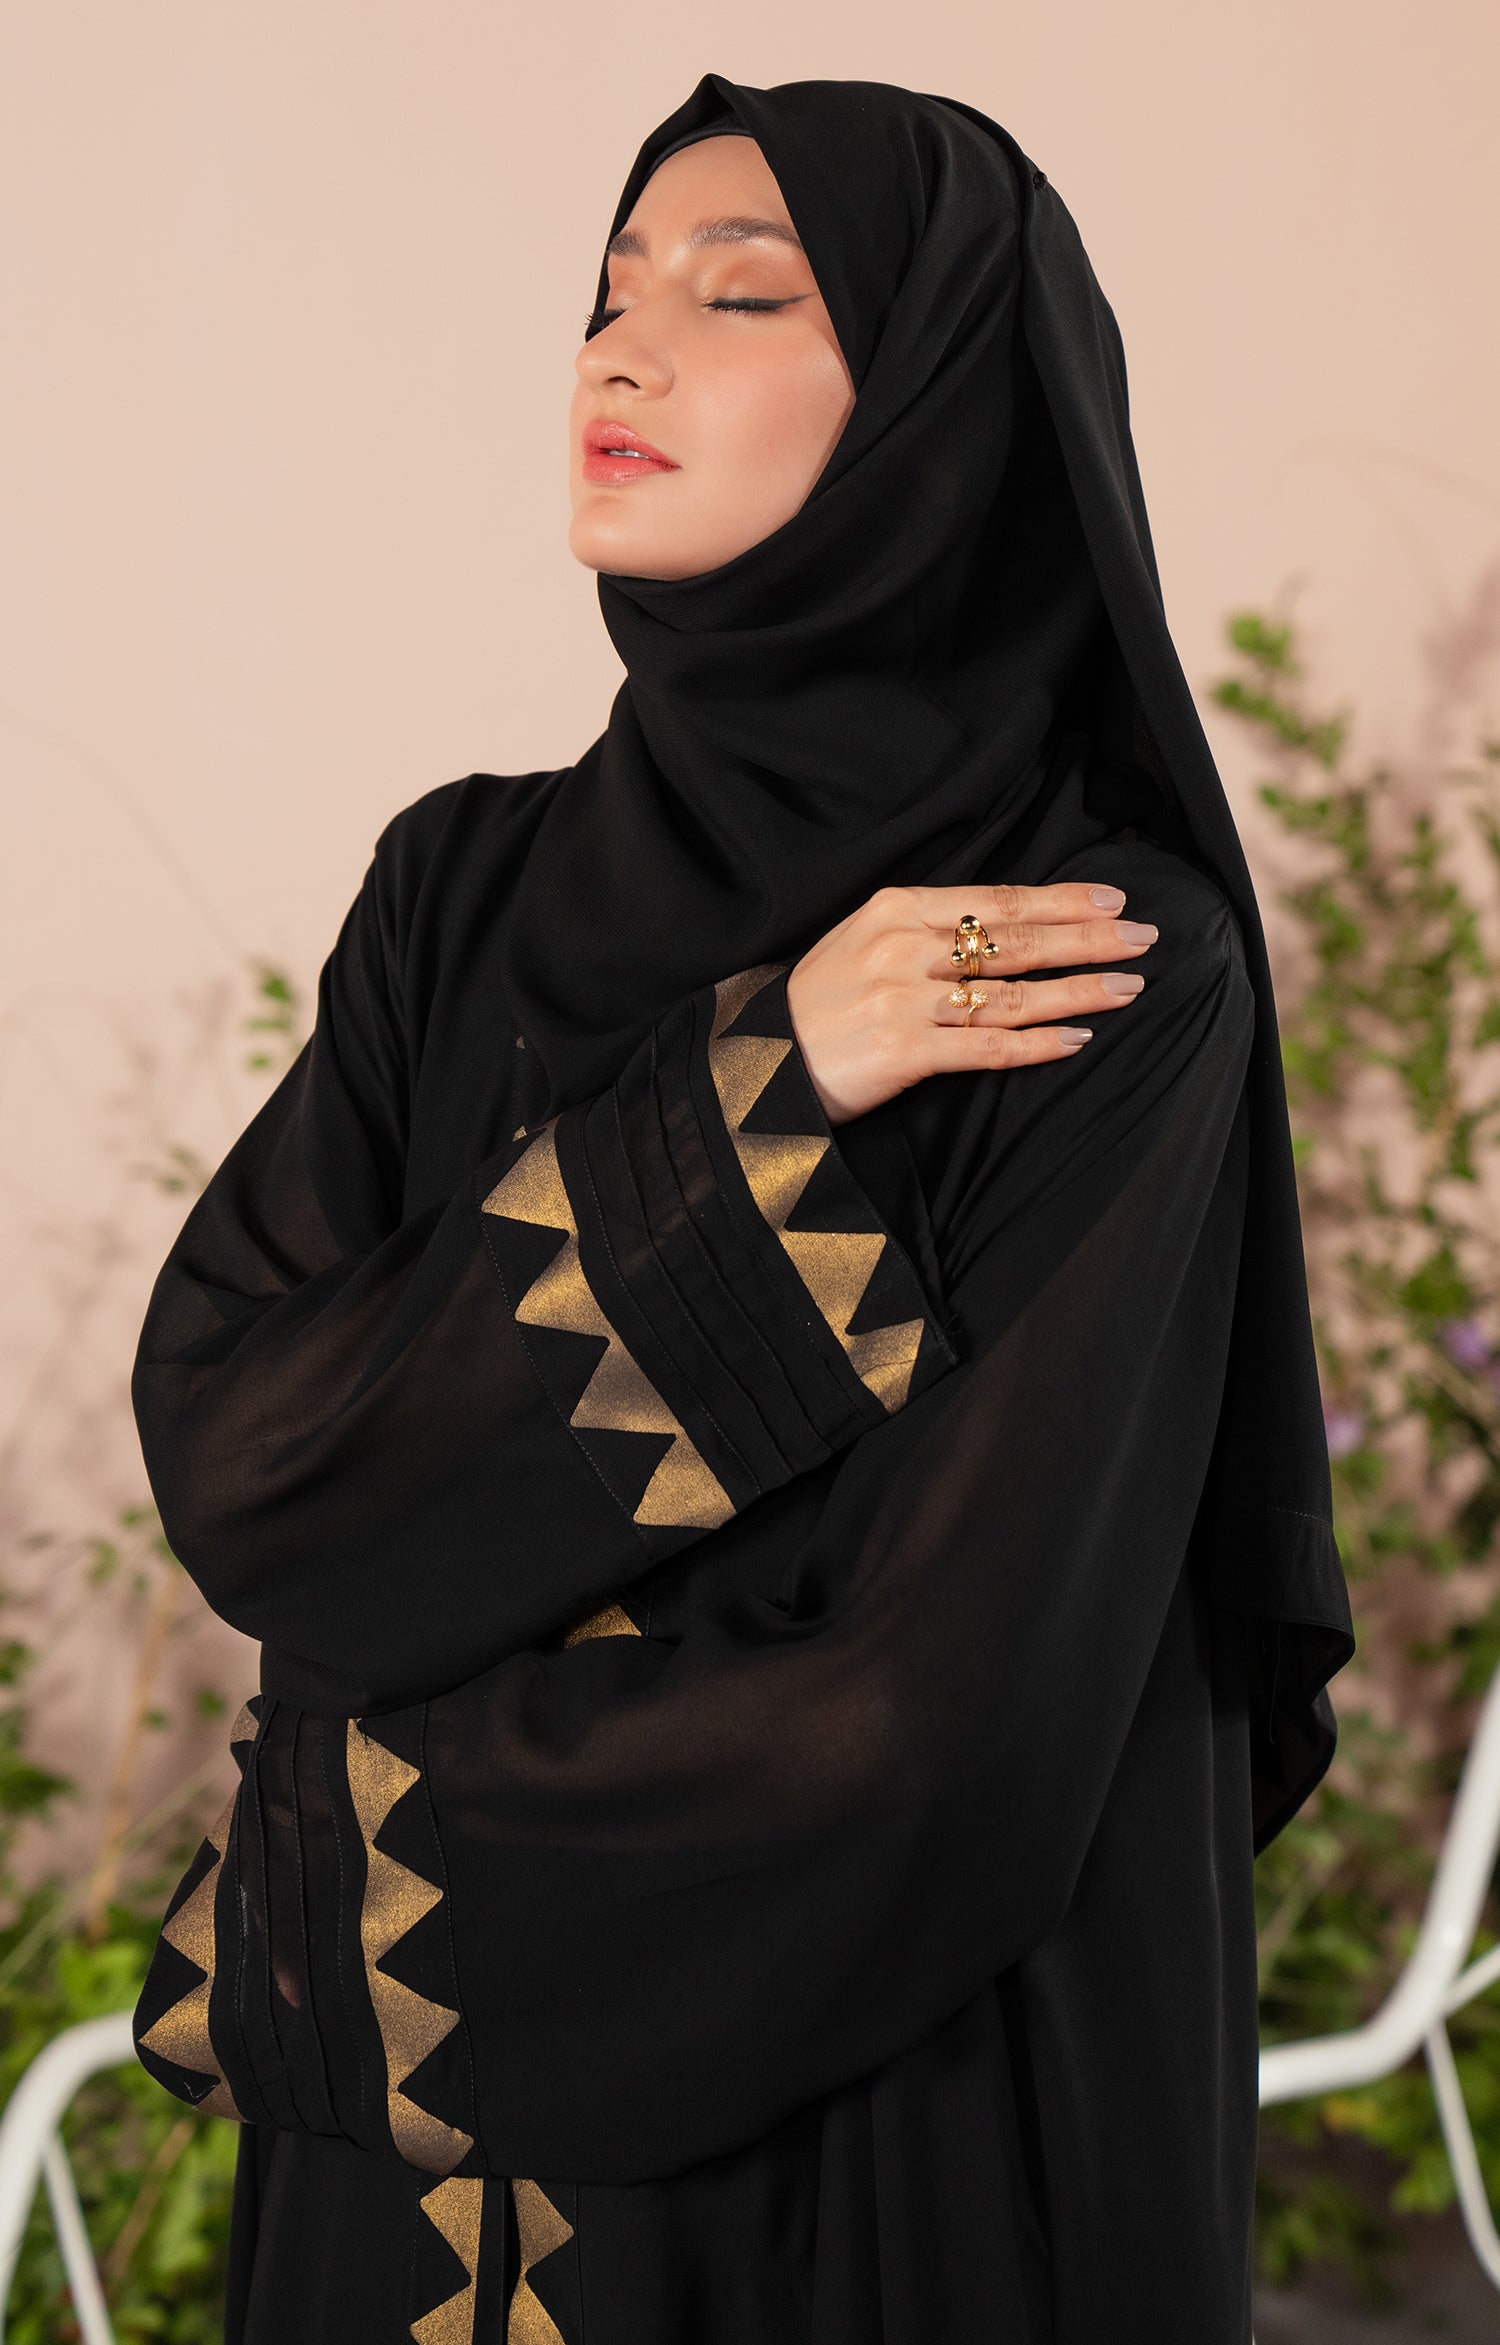 ONYX PEARL FRONT OPEN ABAYA